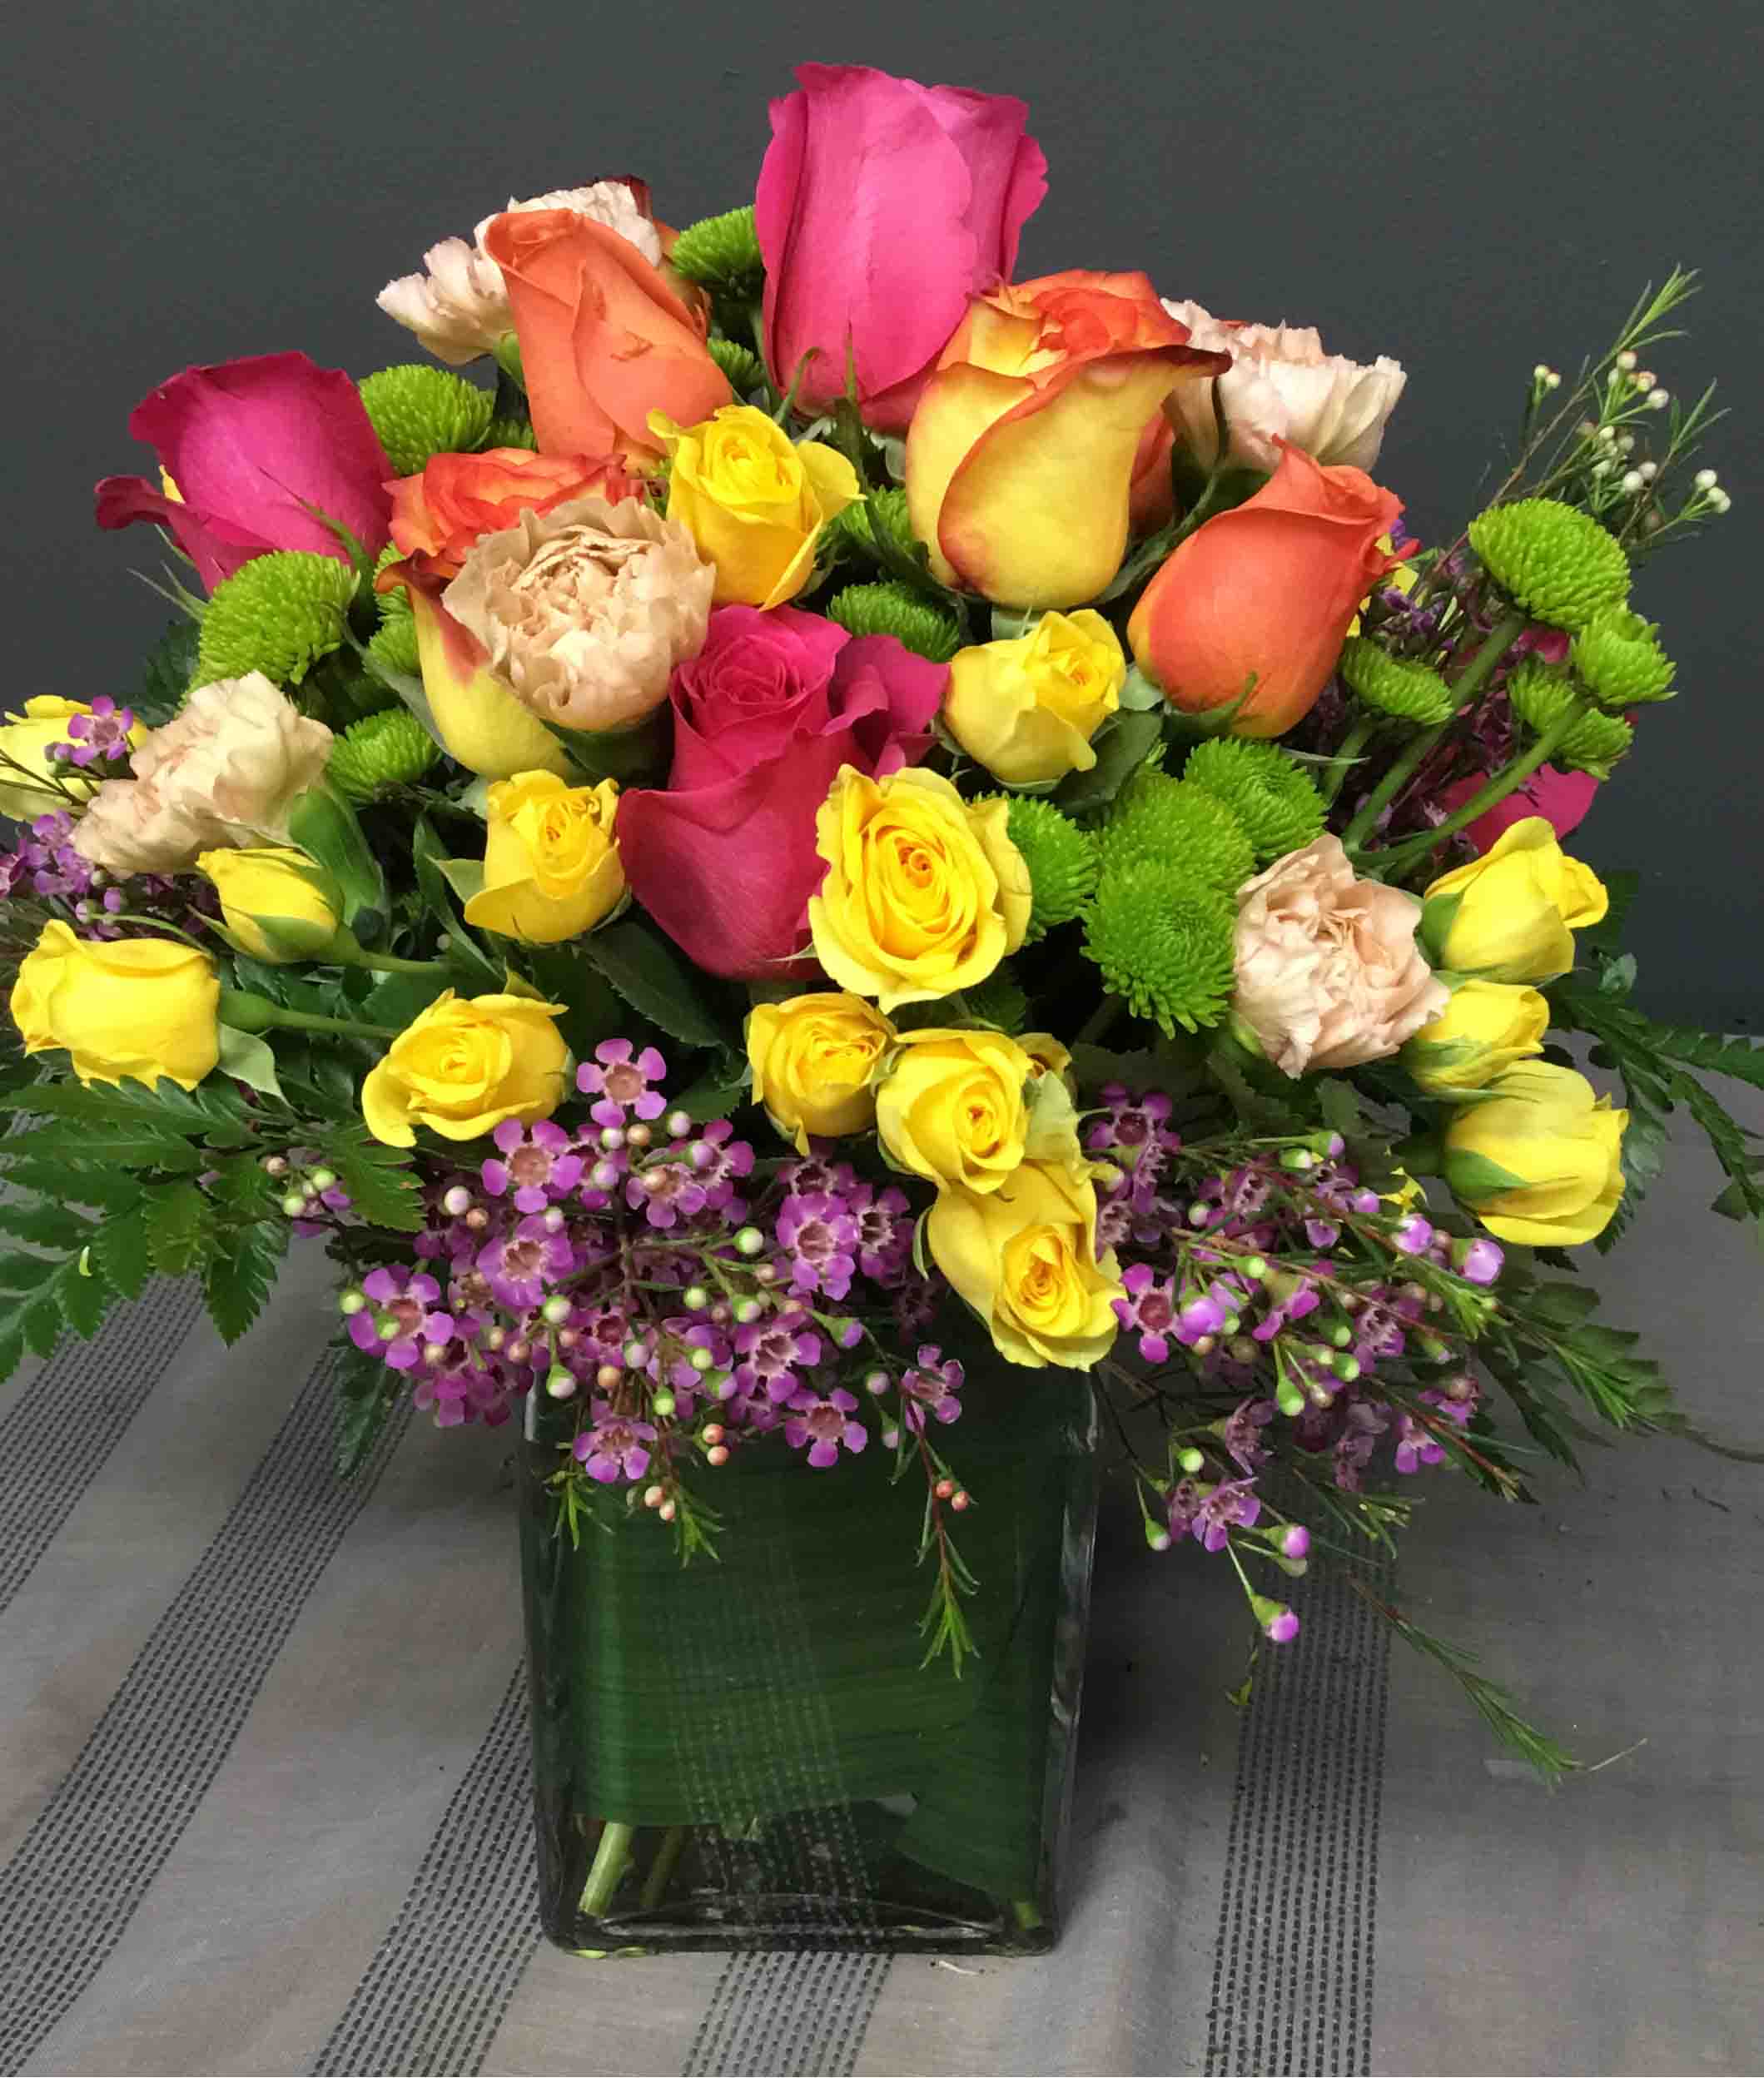 Colorful - Colorful Roses, Waxflower and Button Mums in a Leaf lined vase.